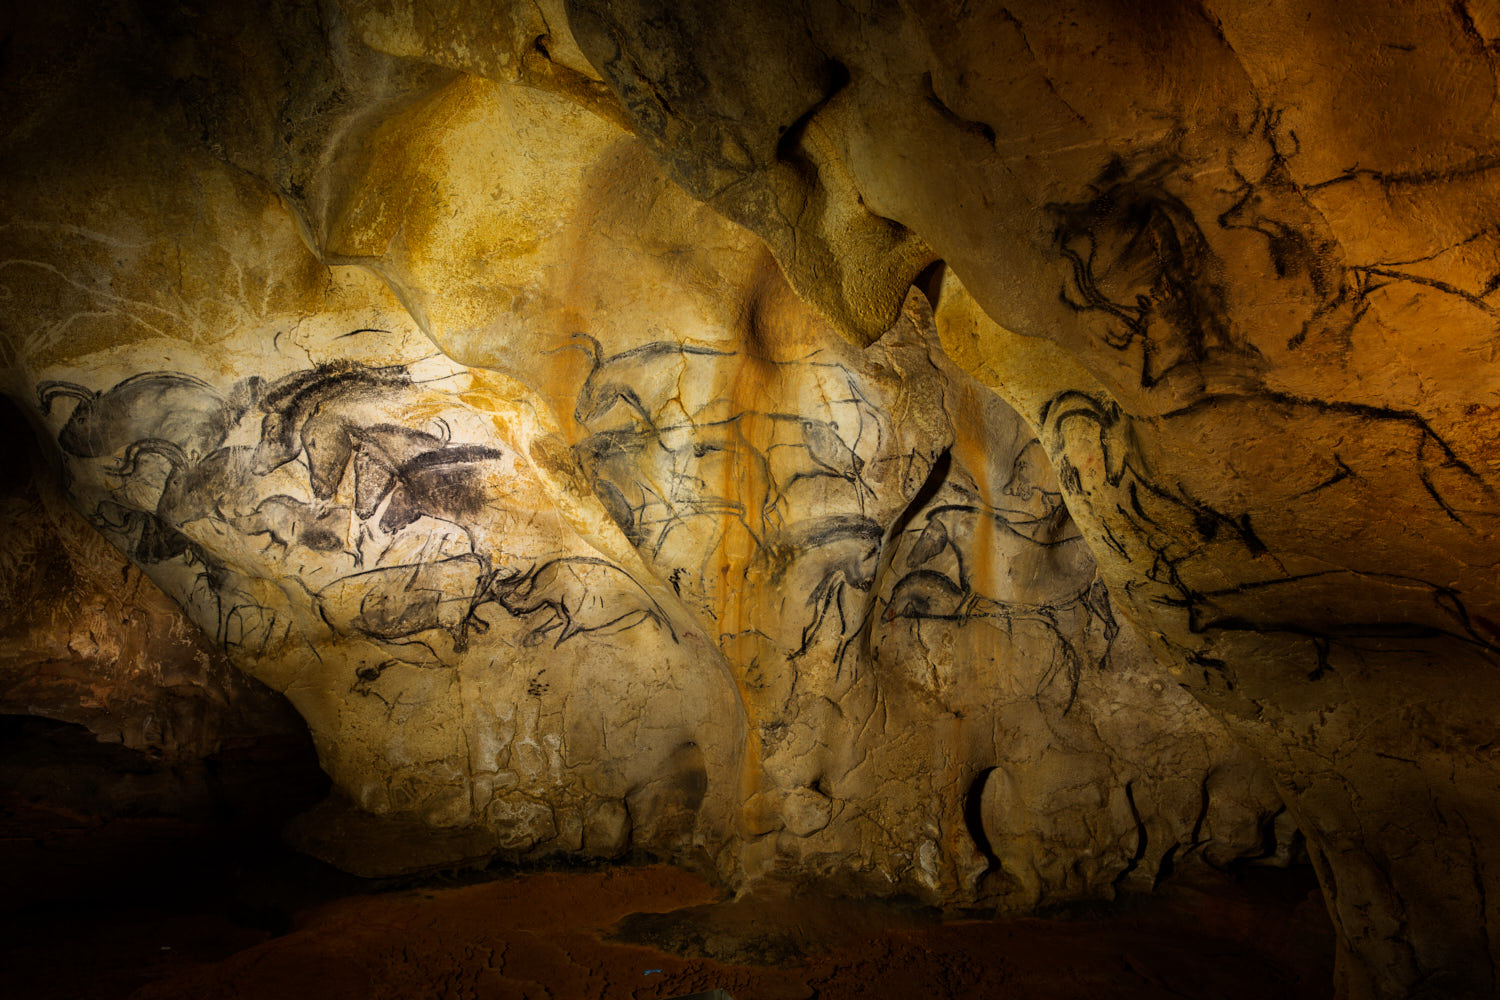 Chauvet Pont d’Arc the discovery of 36,000-year-old art